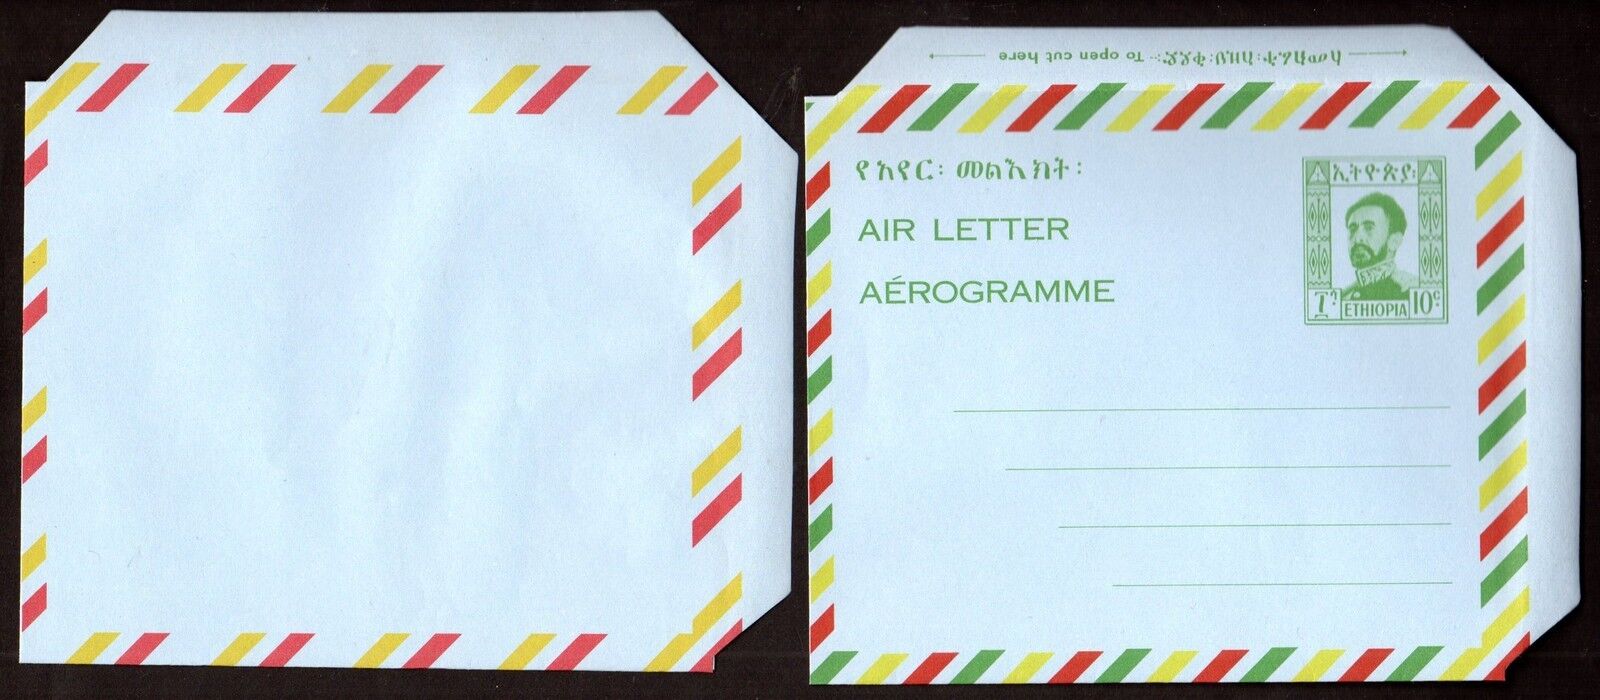 ETHIOPIA 1969 AIR LETTER FG 10 ERROR W/ GREEN PRINT COMPLETELY MISSING + NORMAL